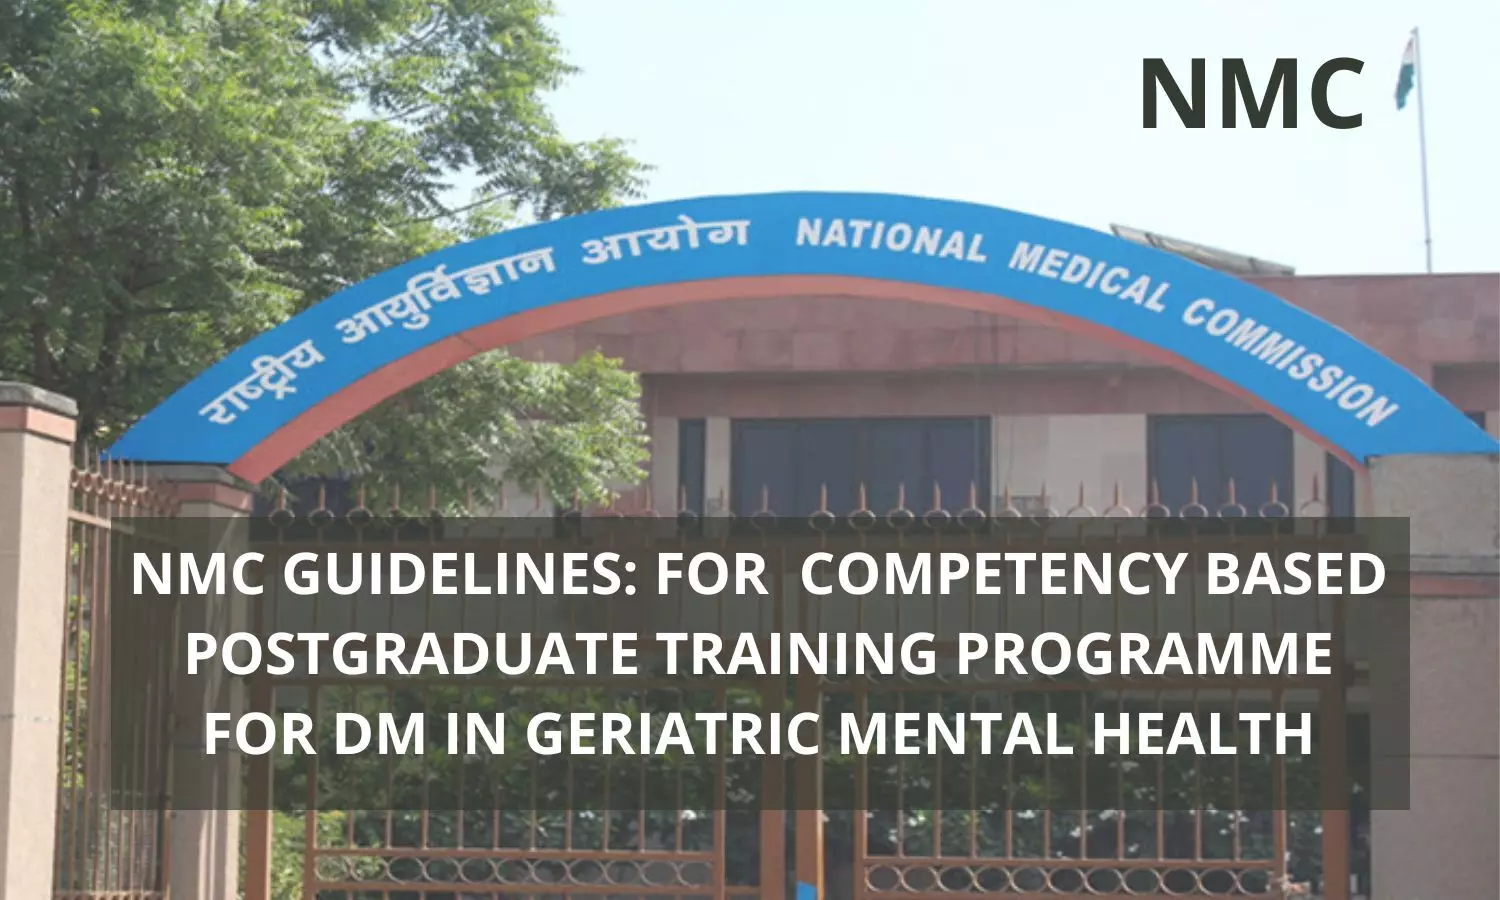 NMC Guidelines For Competency-Based Training Programme For DM Geriatric Mental Health